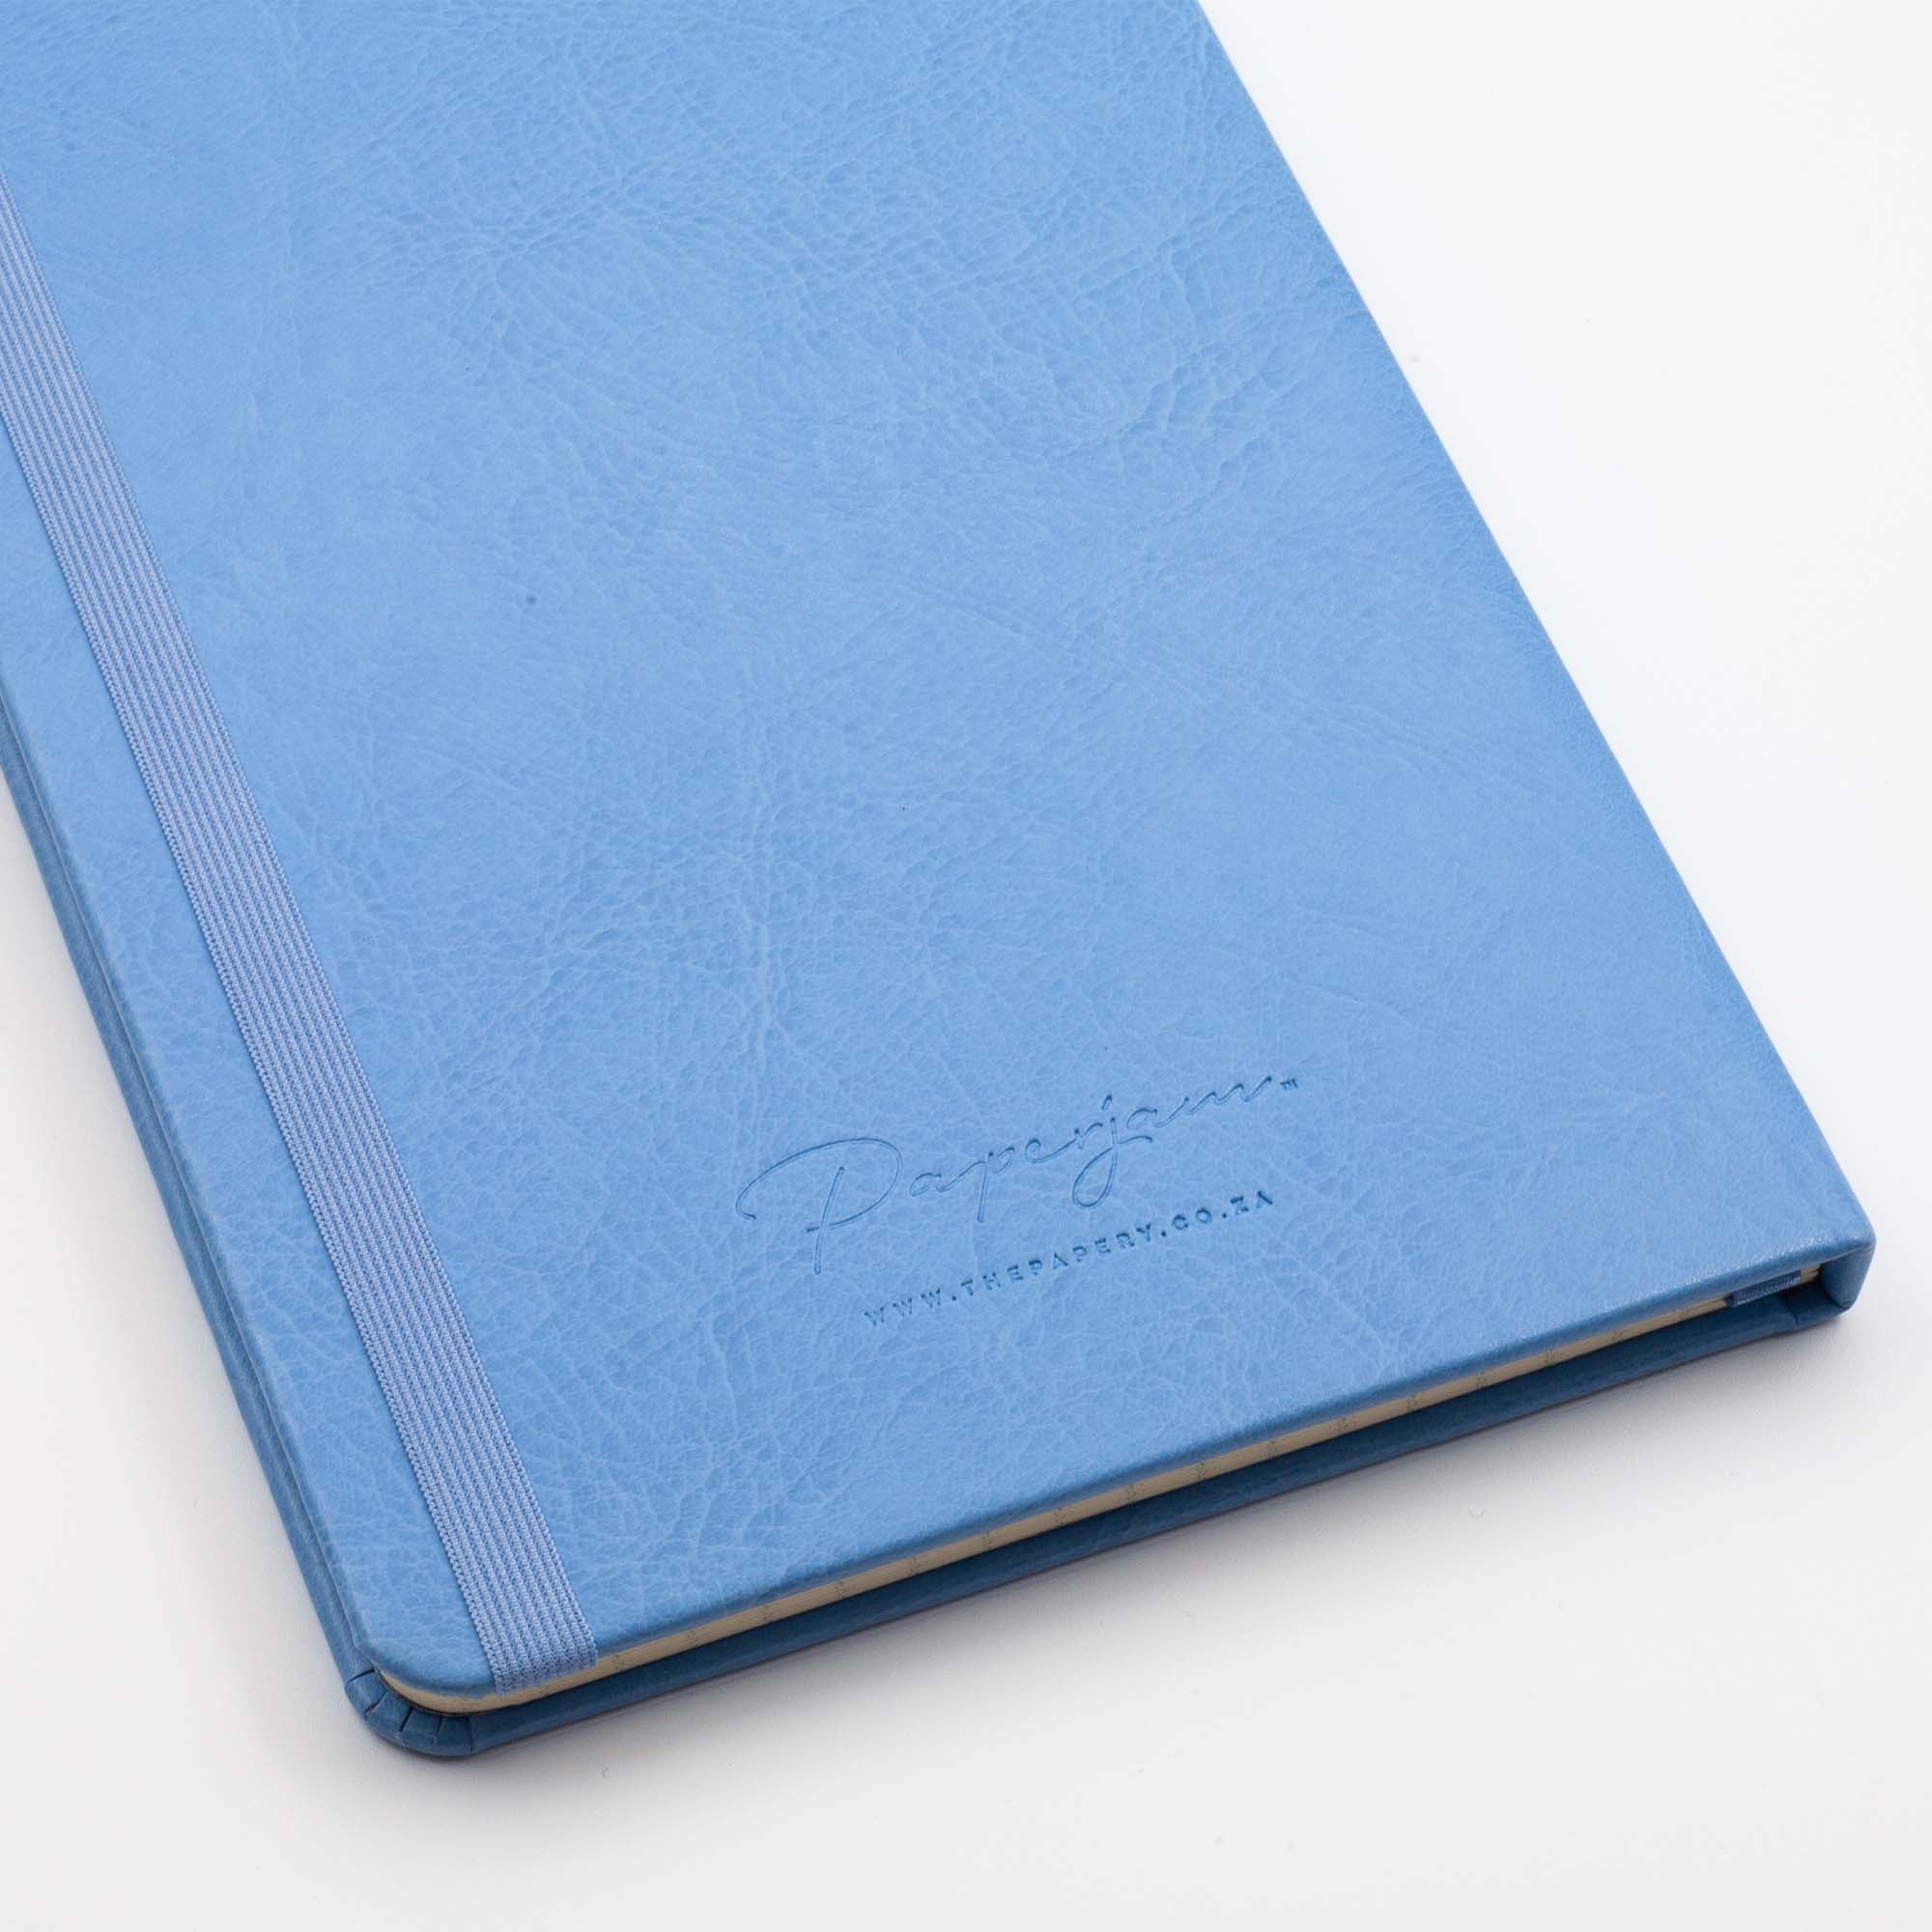 Image shows the back cover of the Classic Light Blue journal